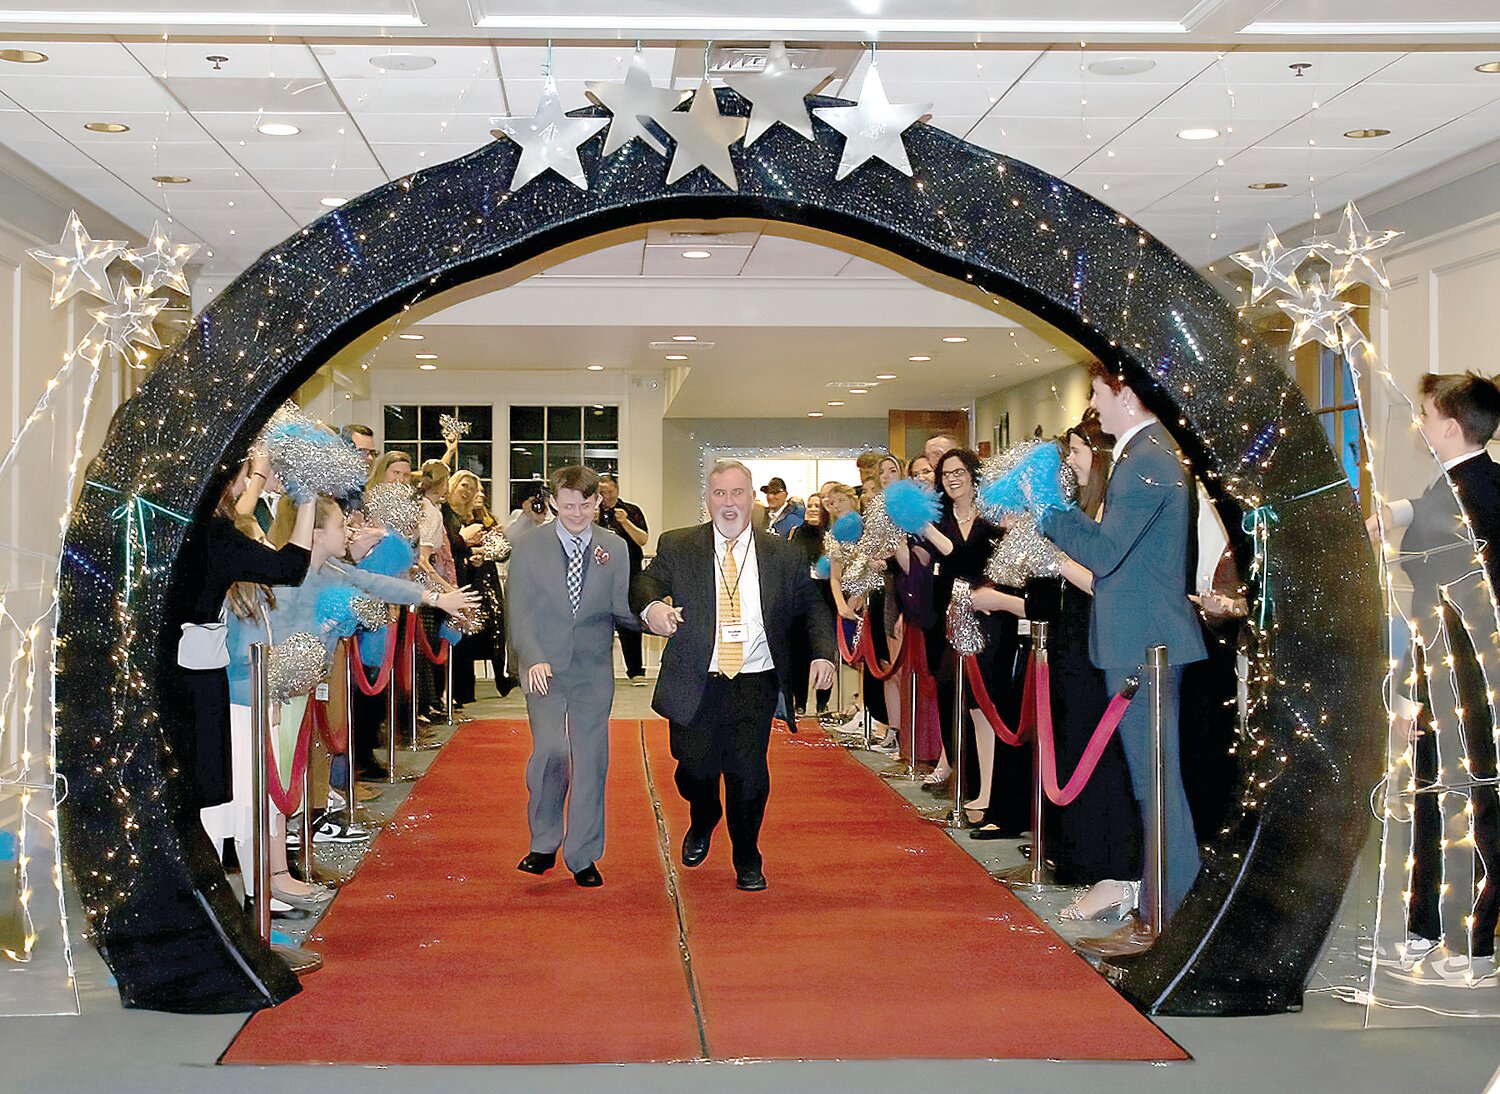 Night to Shine attendees are celebrated as they walk in on the red carpet with their buddy.